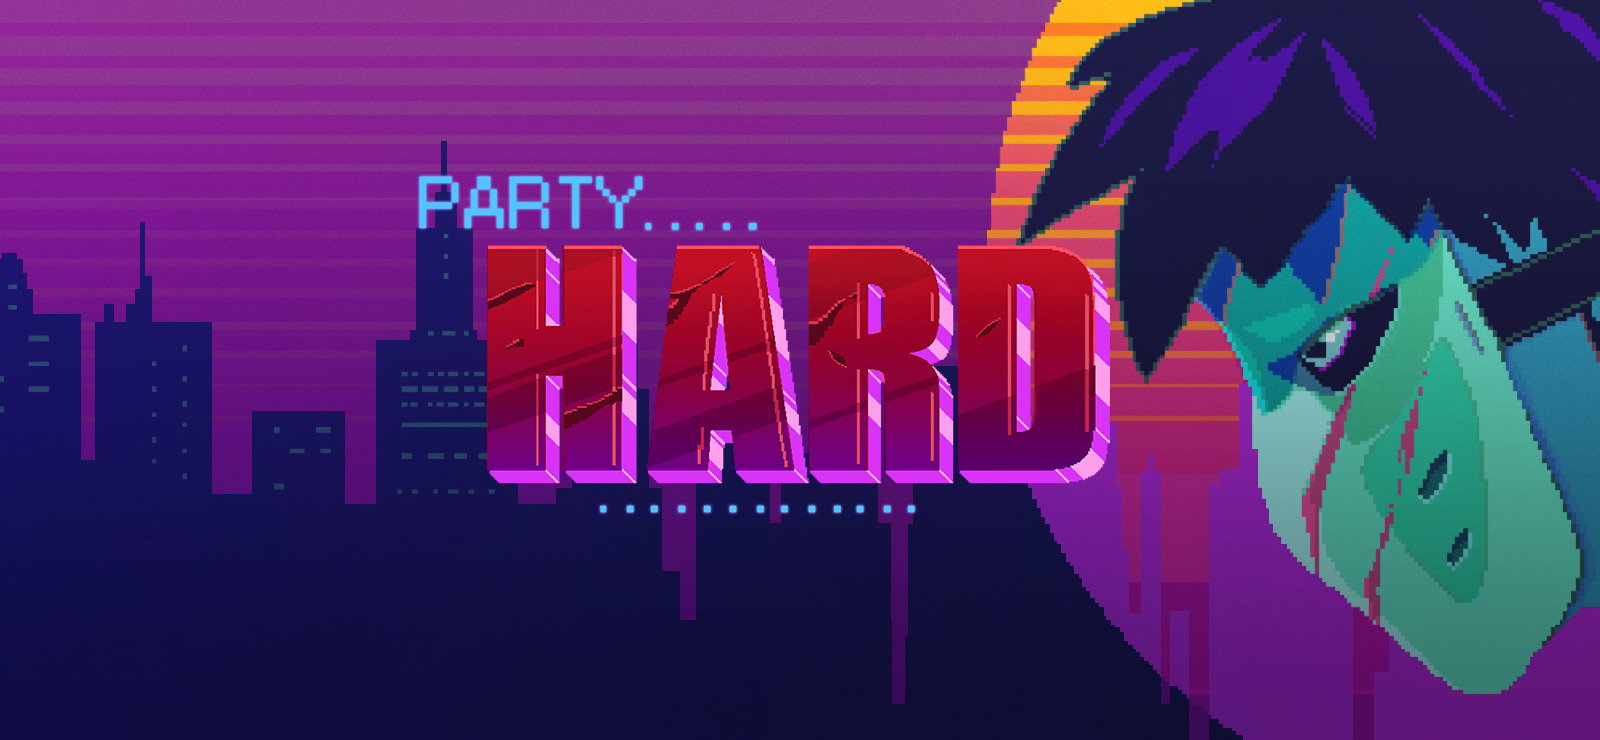 PARTY HARD free online game on